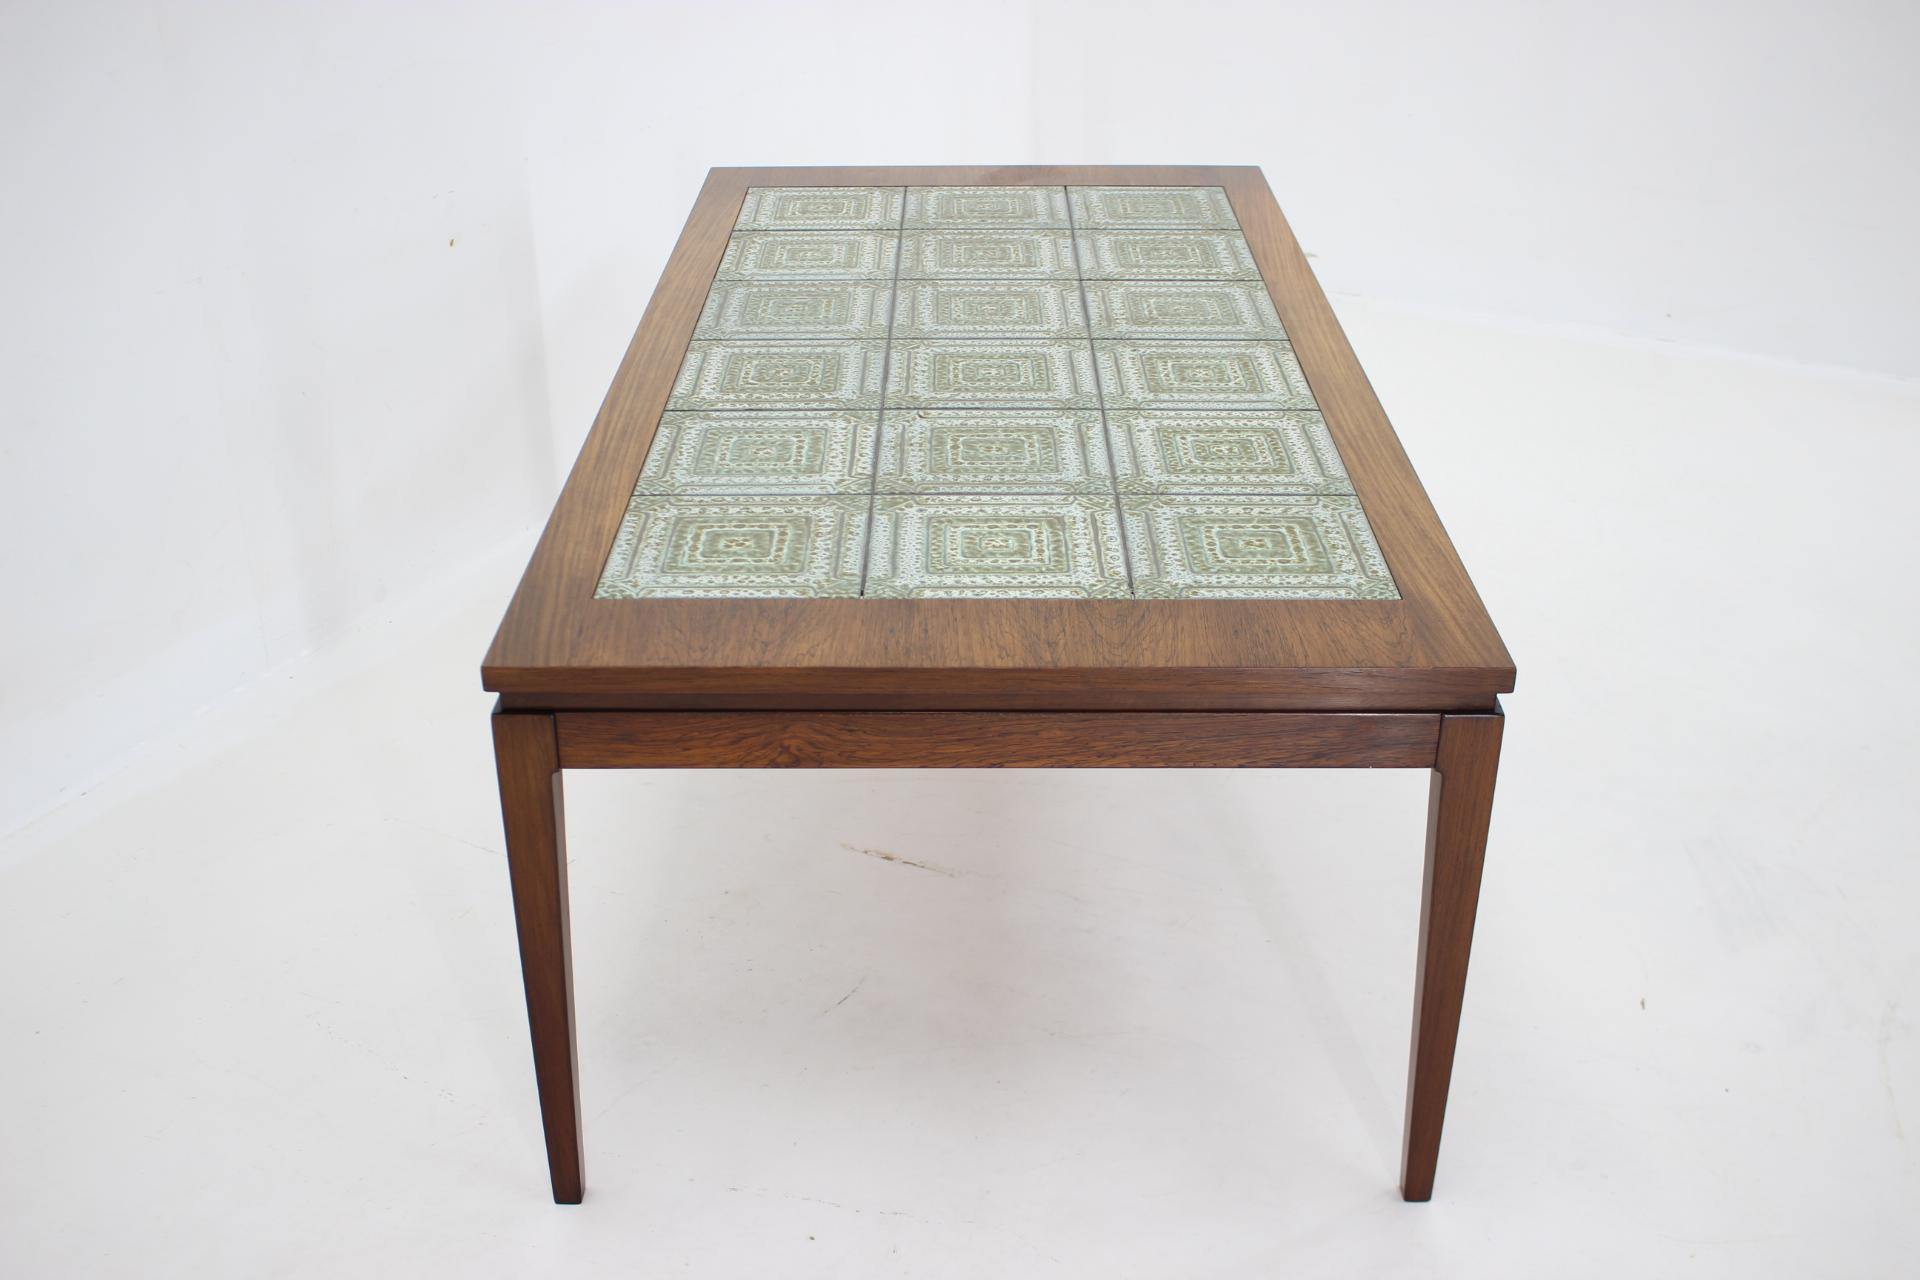 1960s Palisander and Tile Coffee Table, Denmark For Sale 1